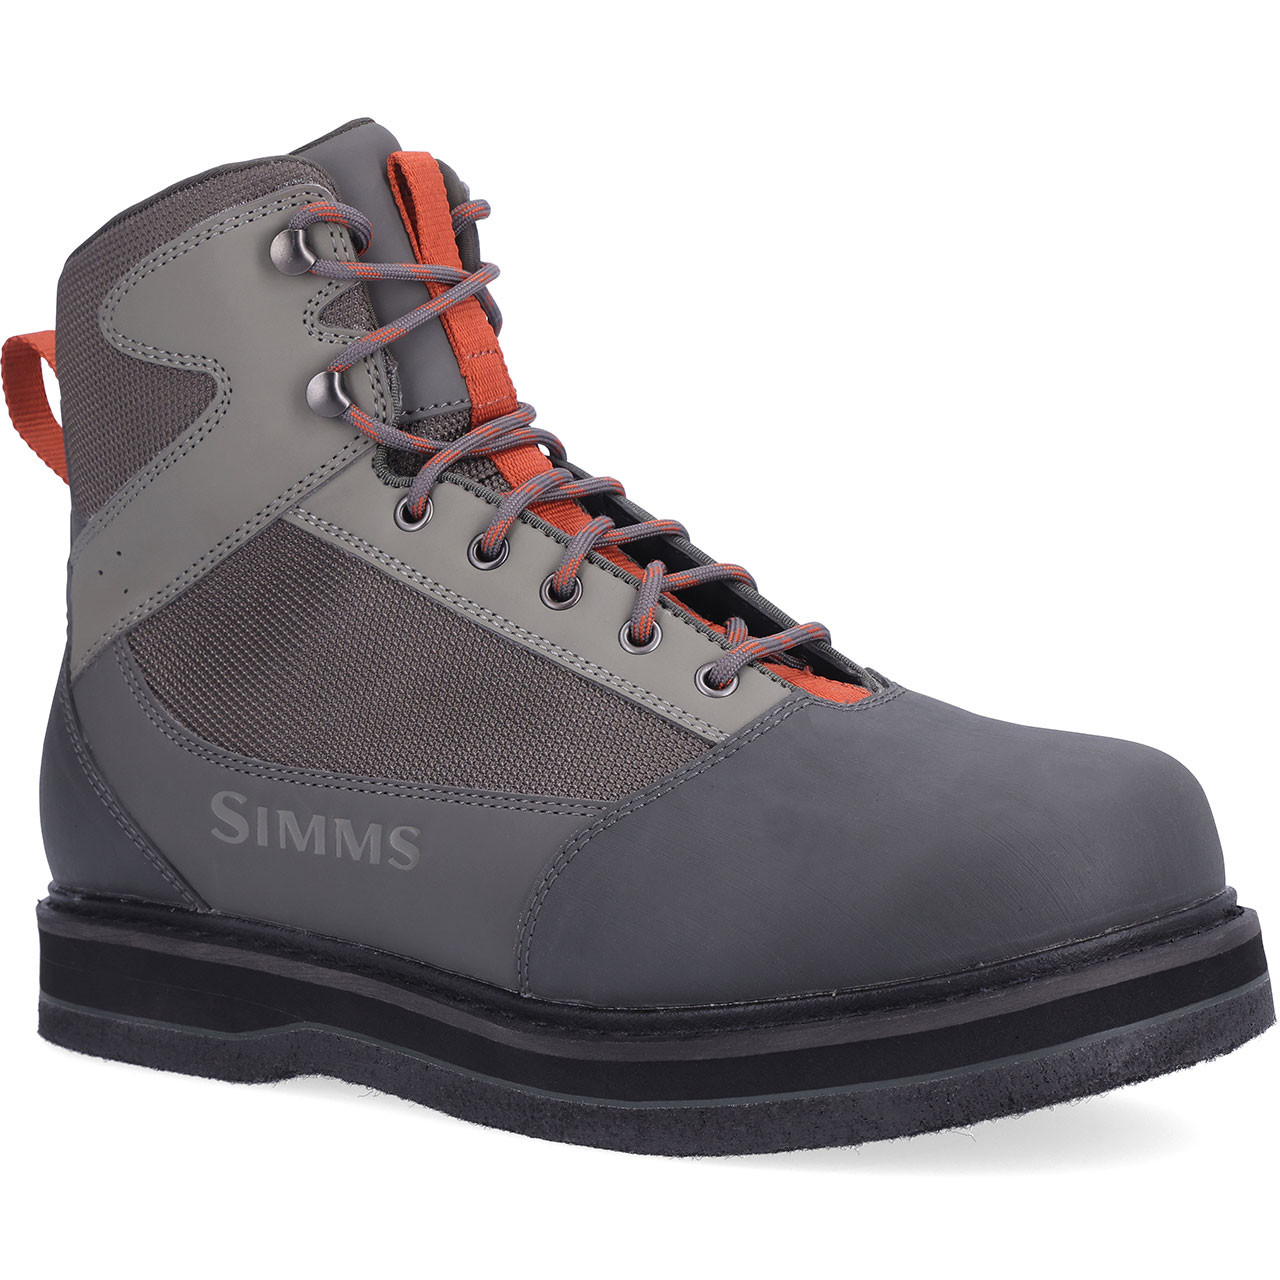 Simms Men's Tributary Wading Boot